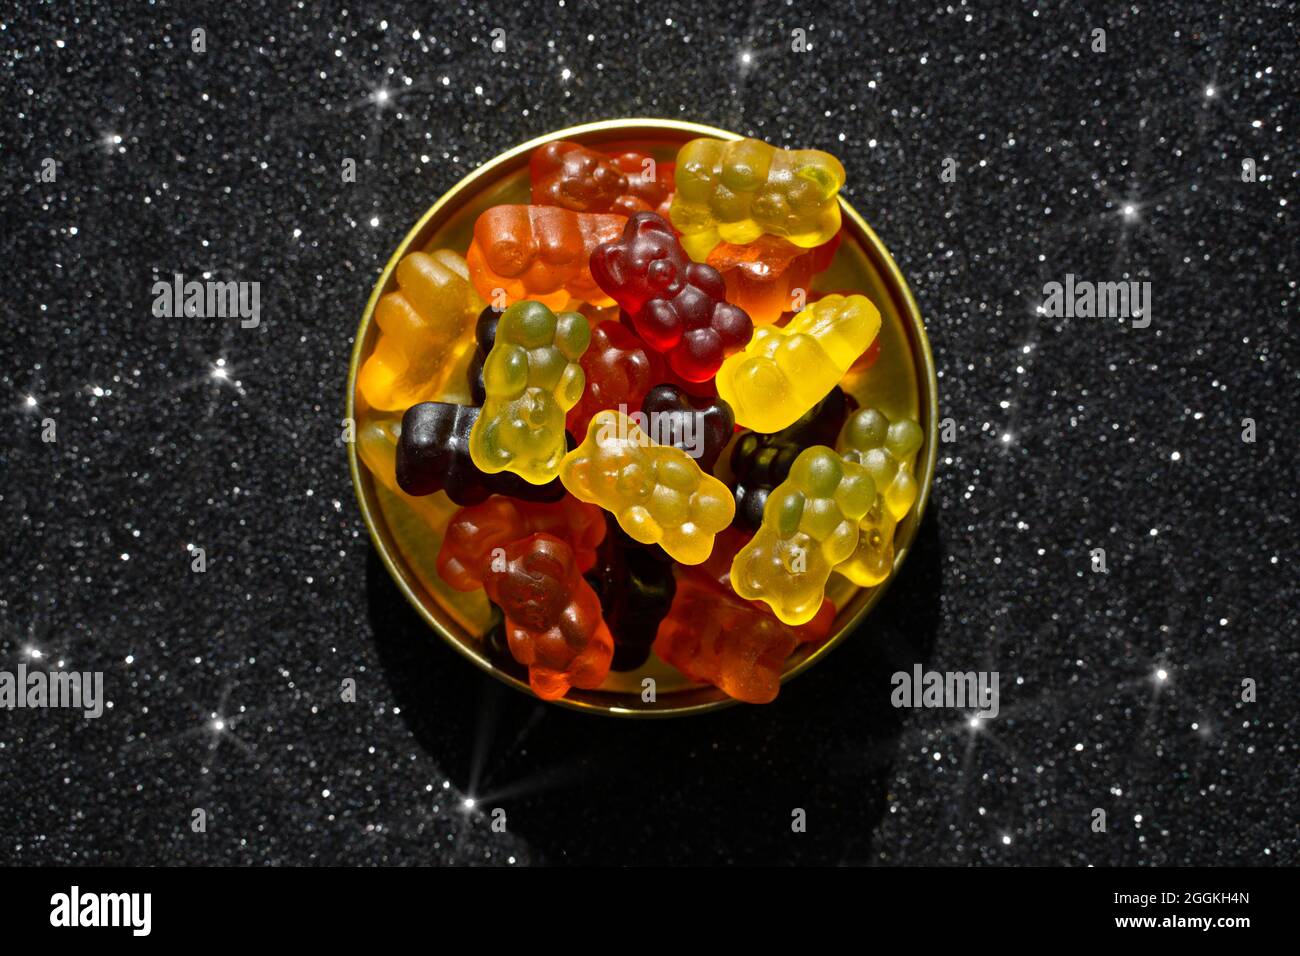 Assortment of gummy bears in a round ting box on a glittering black background Stock Photo